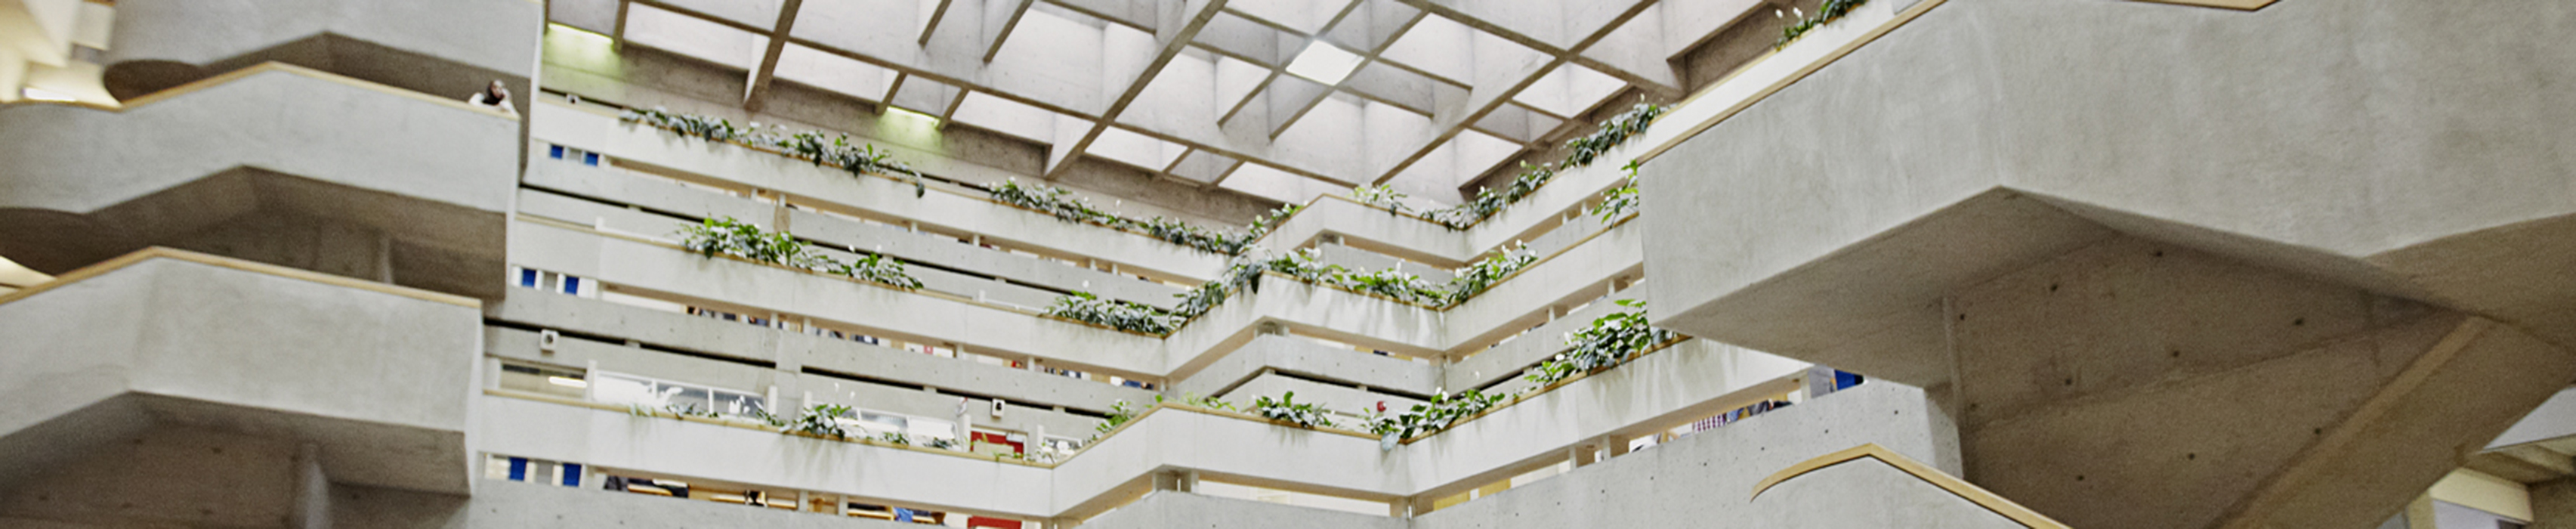 Photo of the stairs and roof of the atrium in the Scott Library - used as a header image for the Open Scholarship website